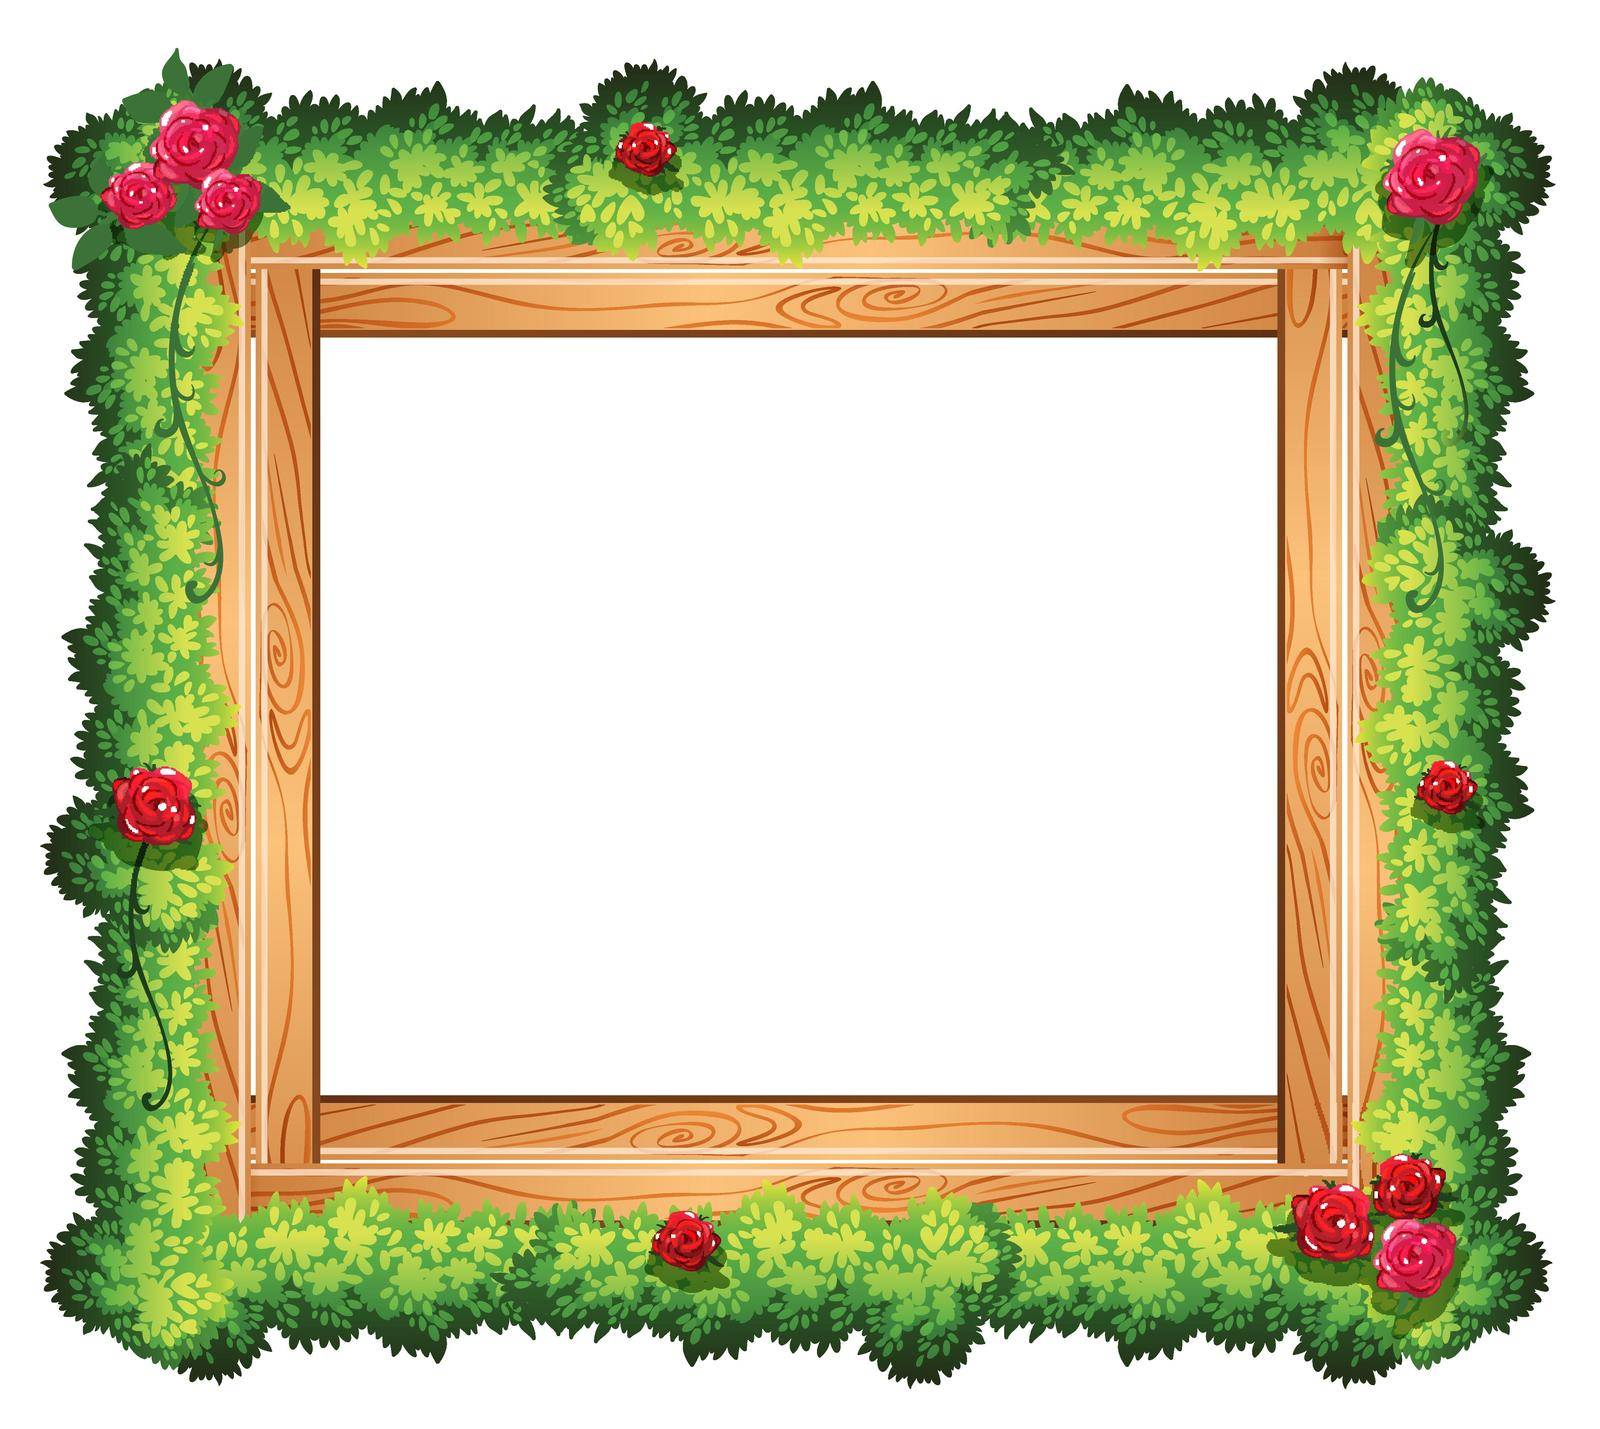 Wooden frame decorated with plants and roses